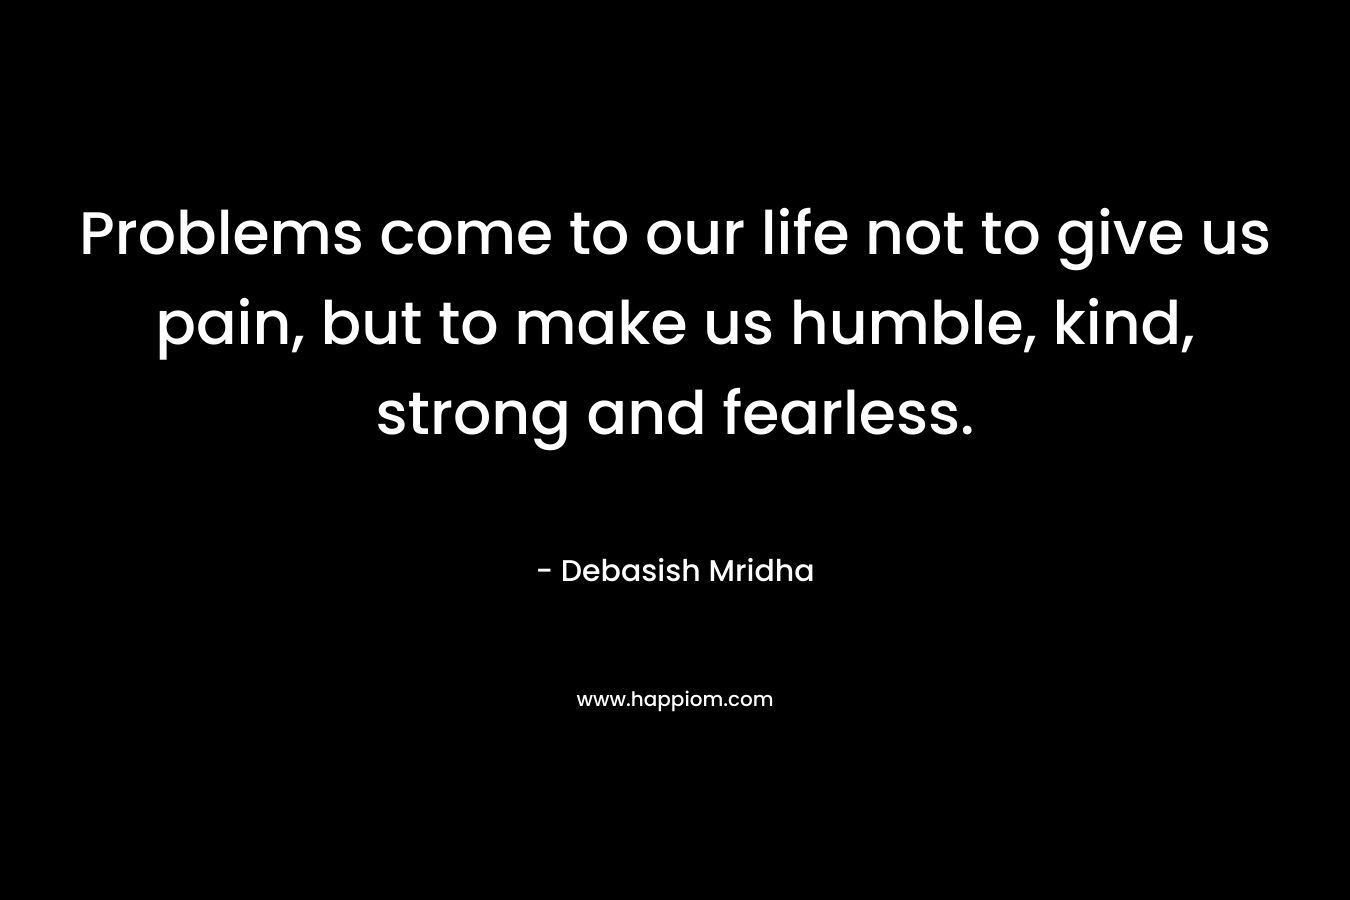 Problems come to our life not to give us pain, but to make us humble, kind, strong and fearless. – Debasish Mridha